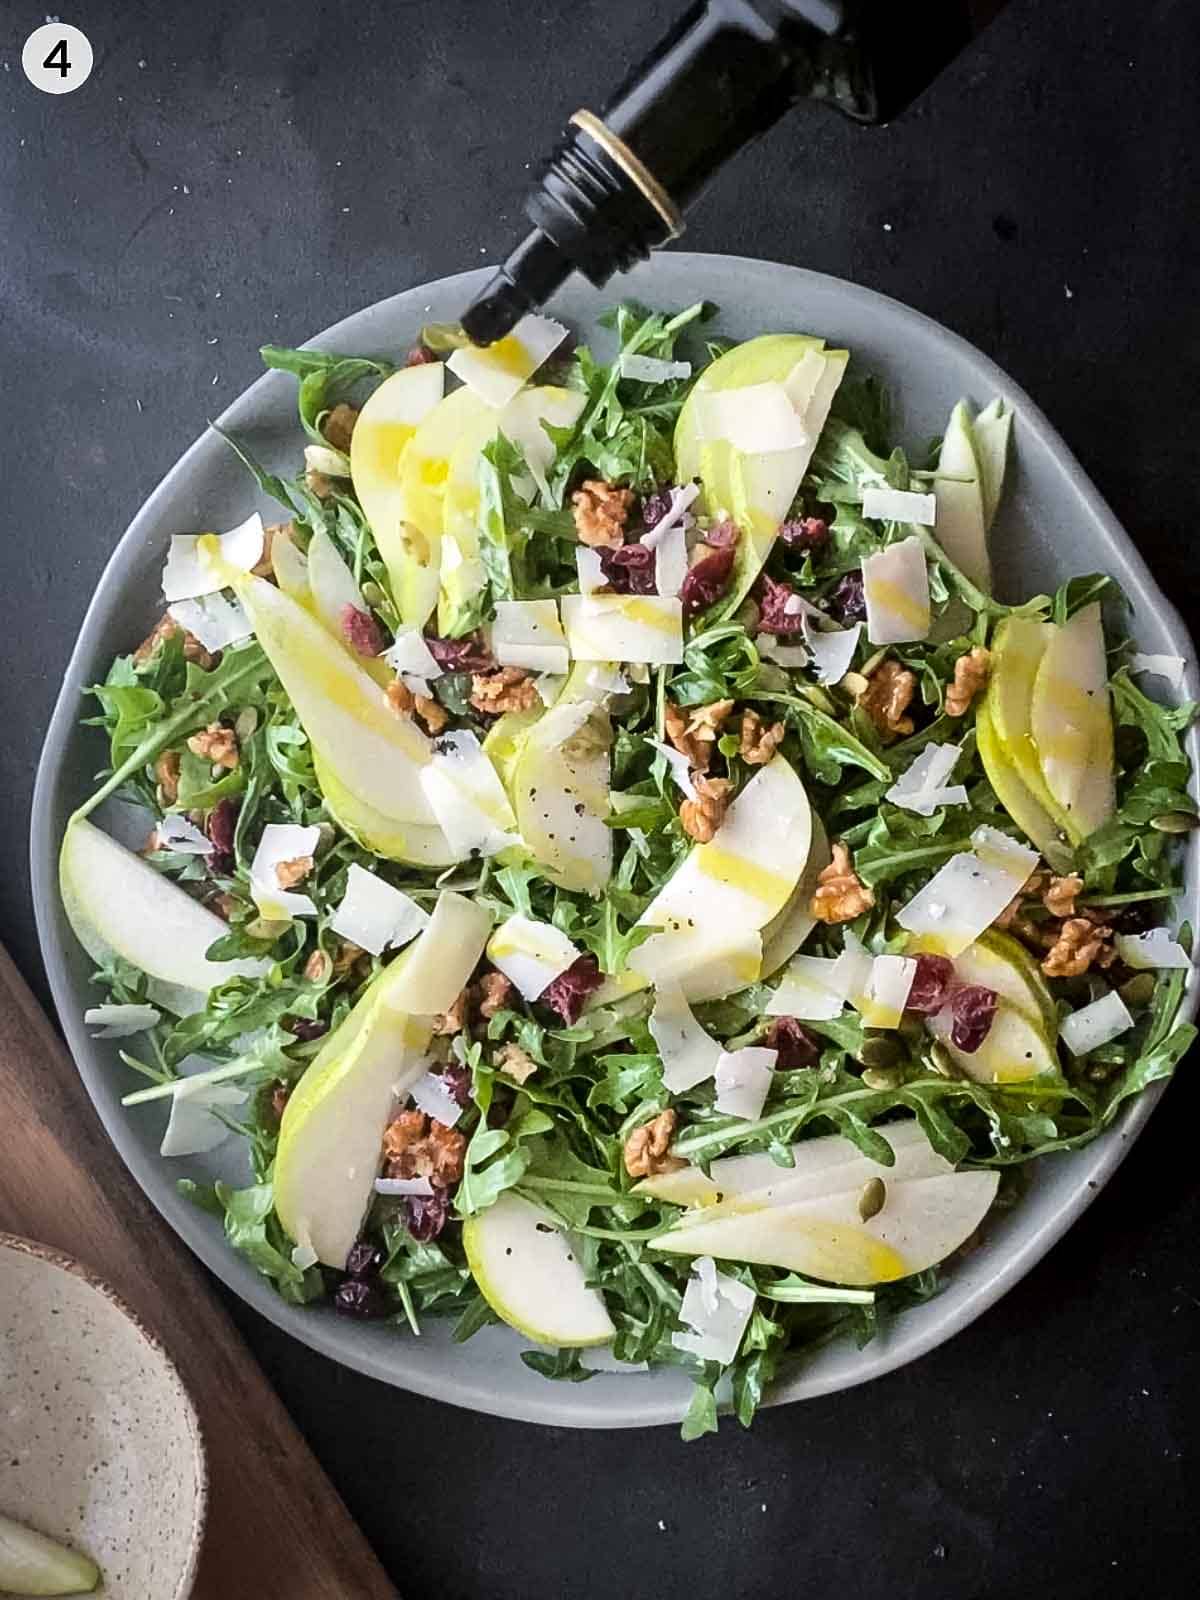 drizzling extra virgin olive oil over salad